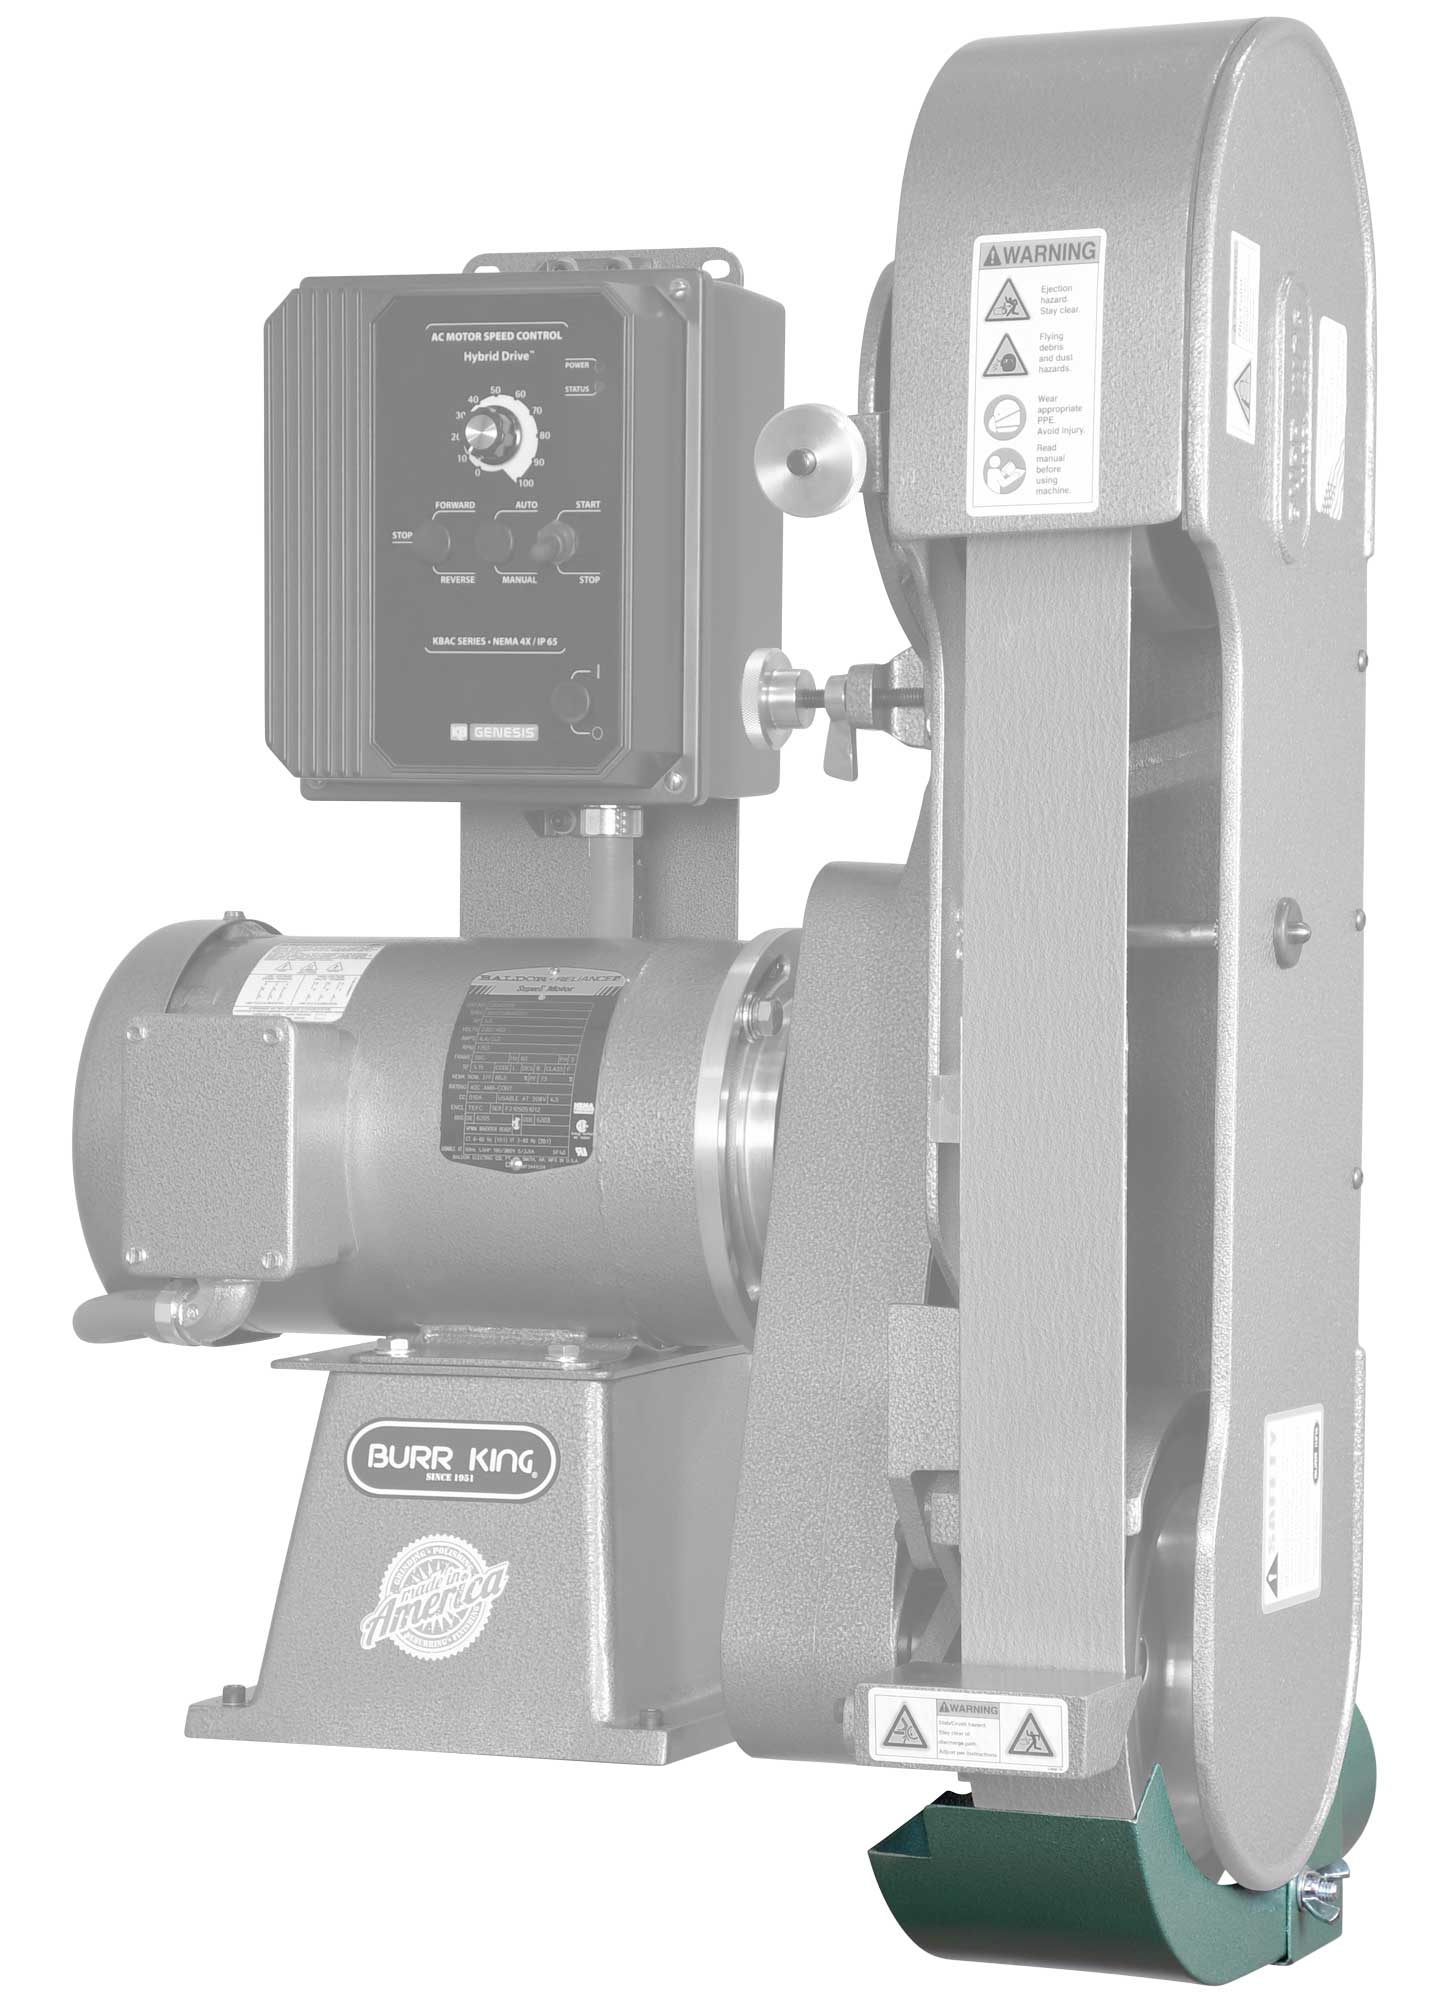 DS9F-2 full wrap dust scoop shown on a Burr King variable speed 960-250 belt grinder